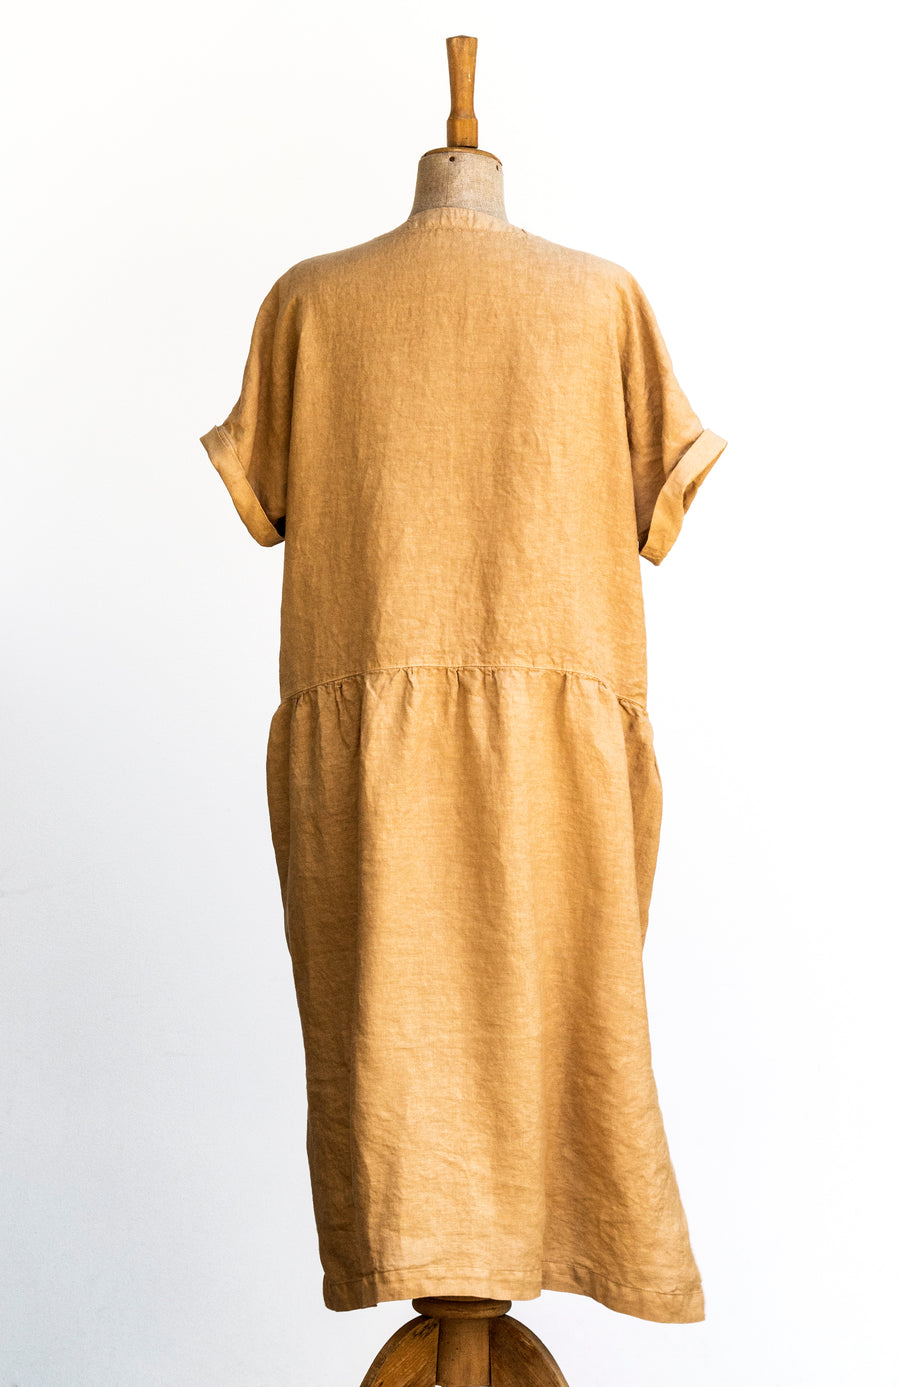 Country dress made of extra fine linen in the shade Curry